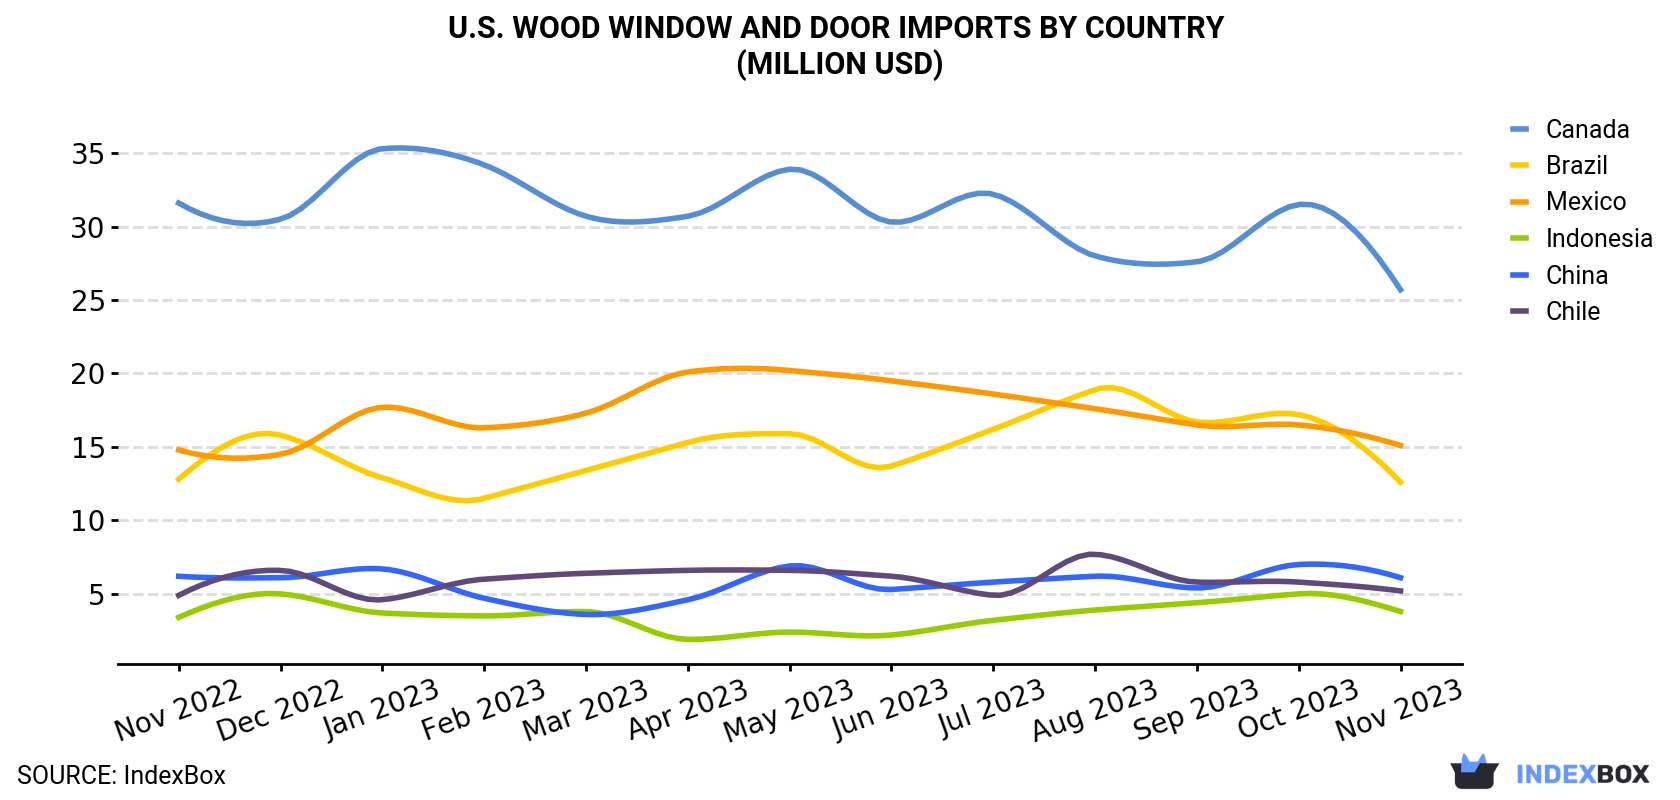 U.S. Wood Window and Door Imports By Country (Million USD)